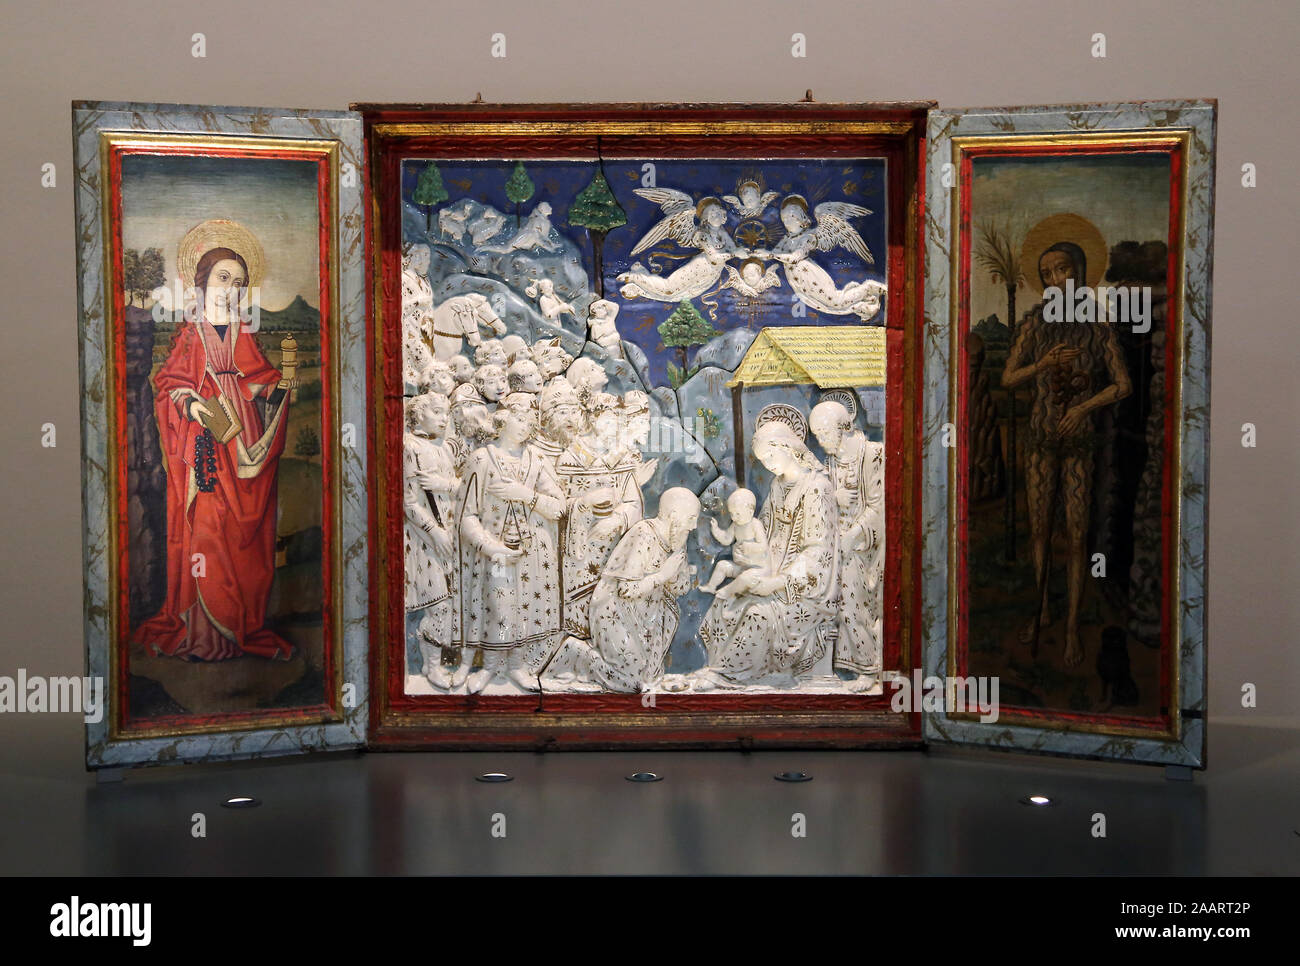 Factitious triptych with doors with paints added. Glazed terracotta. 1475. Della Robbia workshop. Museu Pedralbes, Barcelona. Spain. Stock Photo